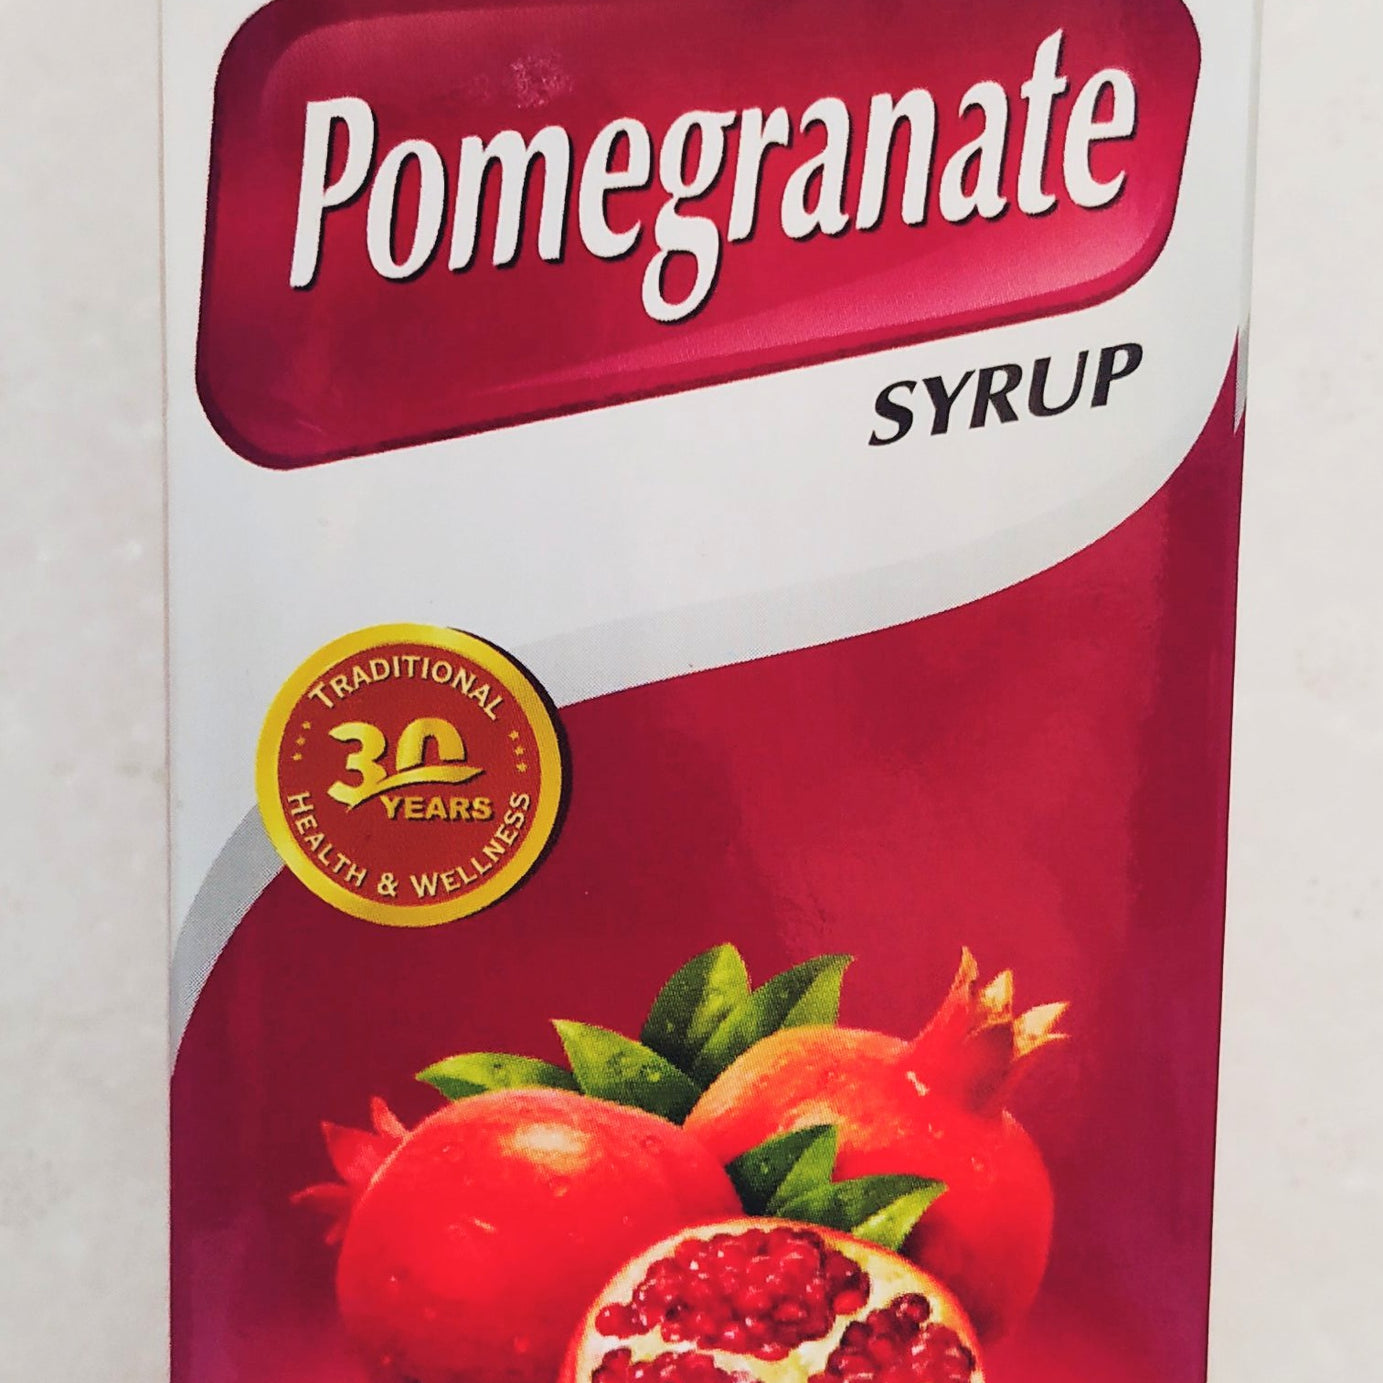 Shop SKM Pomegranate Syrup 200ml at price 197.00 from SKM Online - Ayush Care